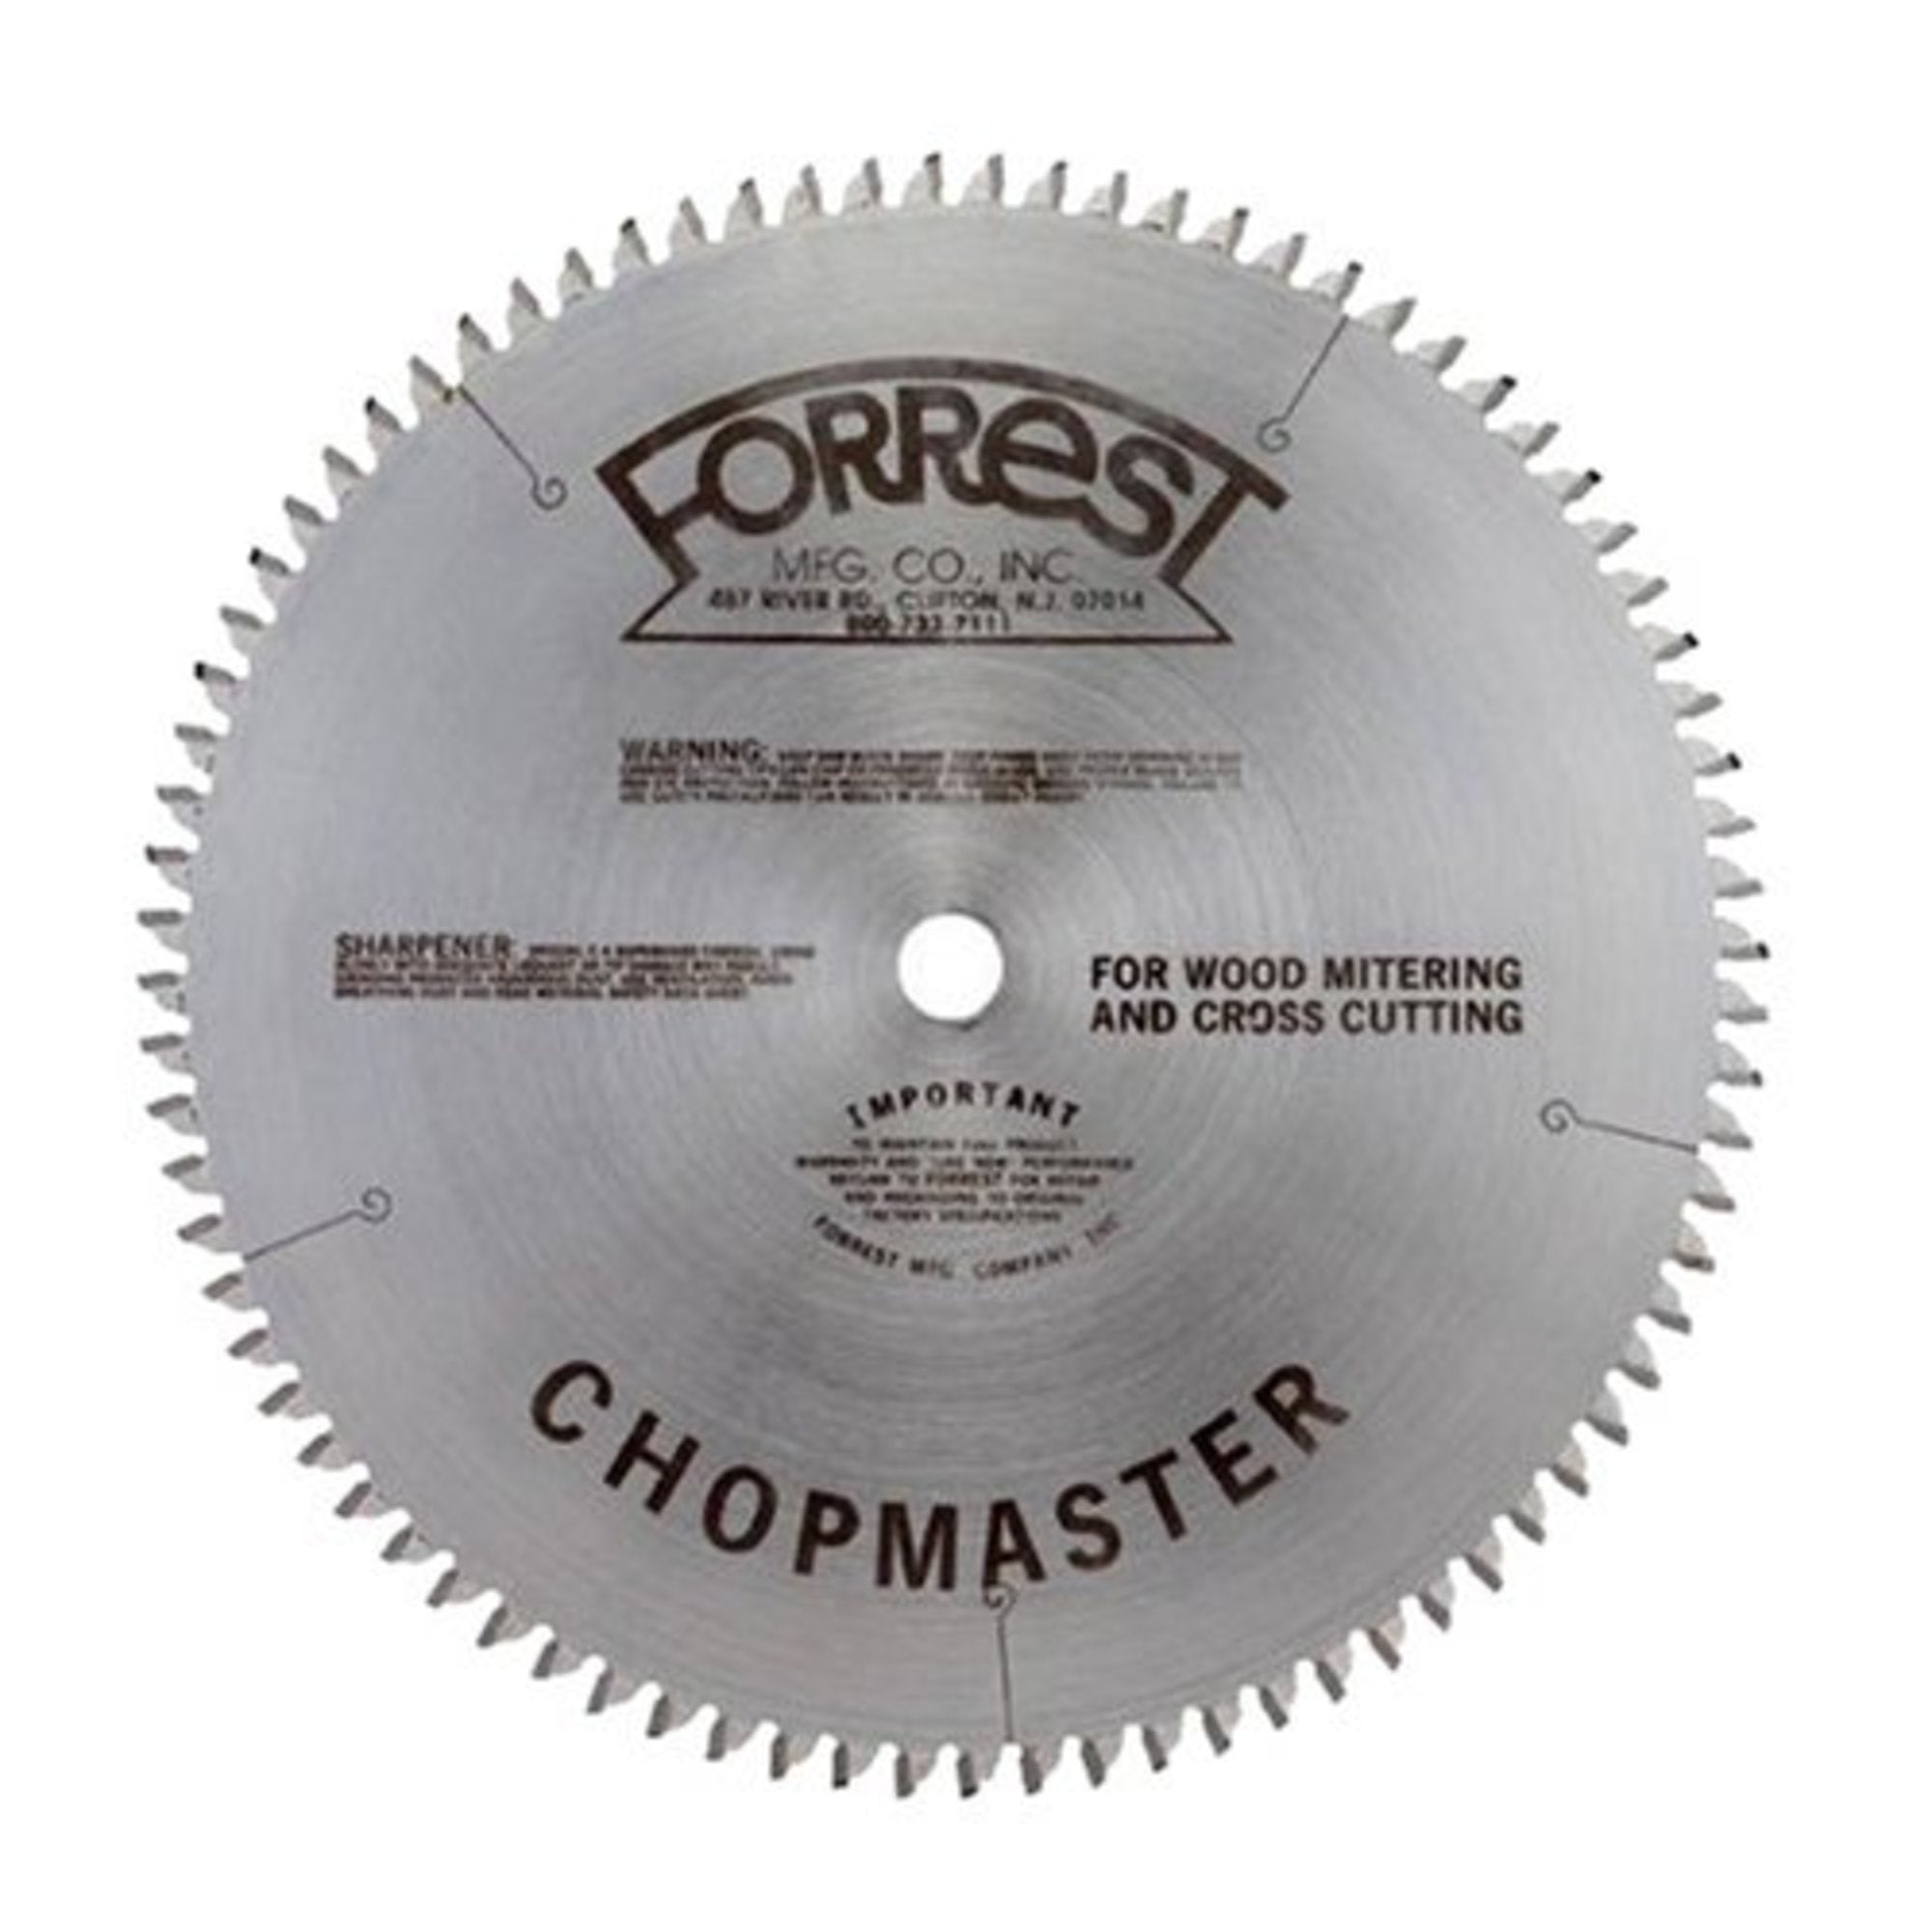 Buy Forrest CM12806115G Chopmaster 12-Inch 80 Tooth PTS Flat 1/8-Inch  Kerf Saw Blade with 1-Inch Arbor at Prime Tools for only 213.59